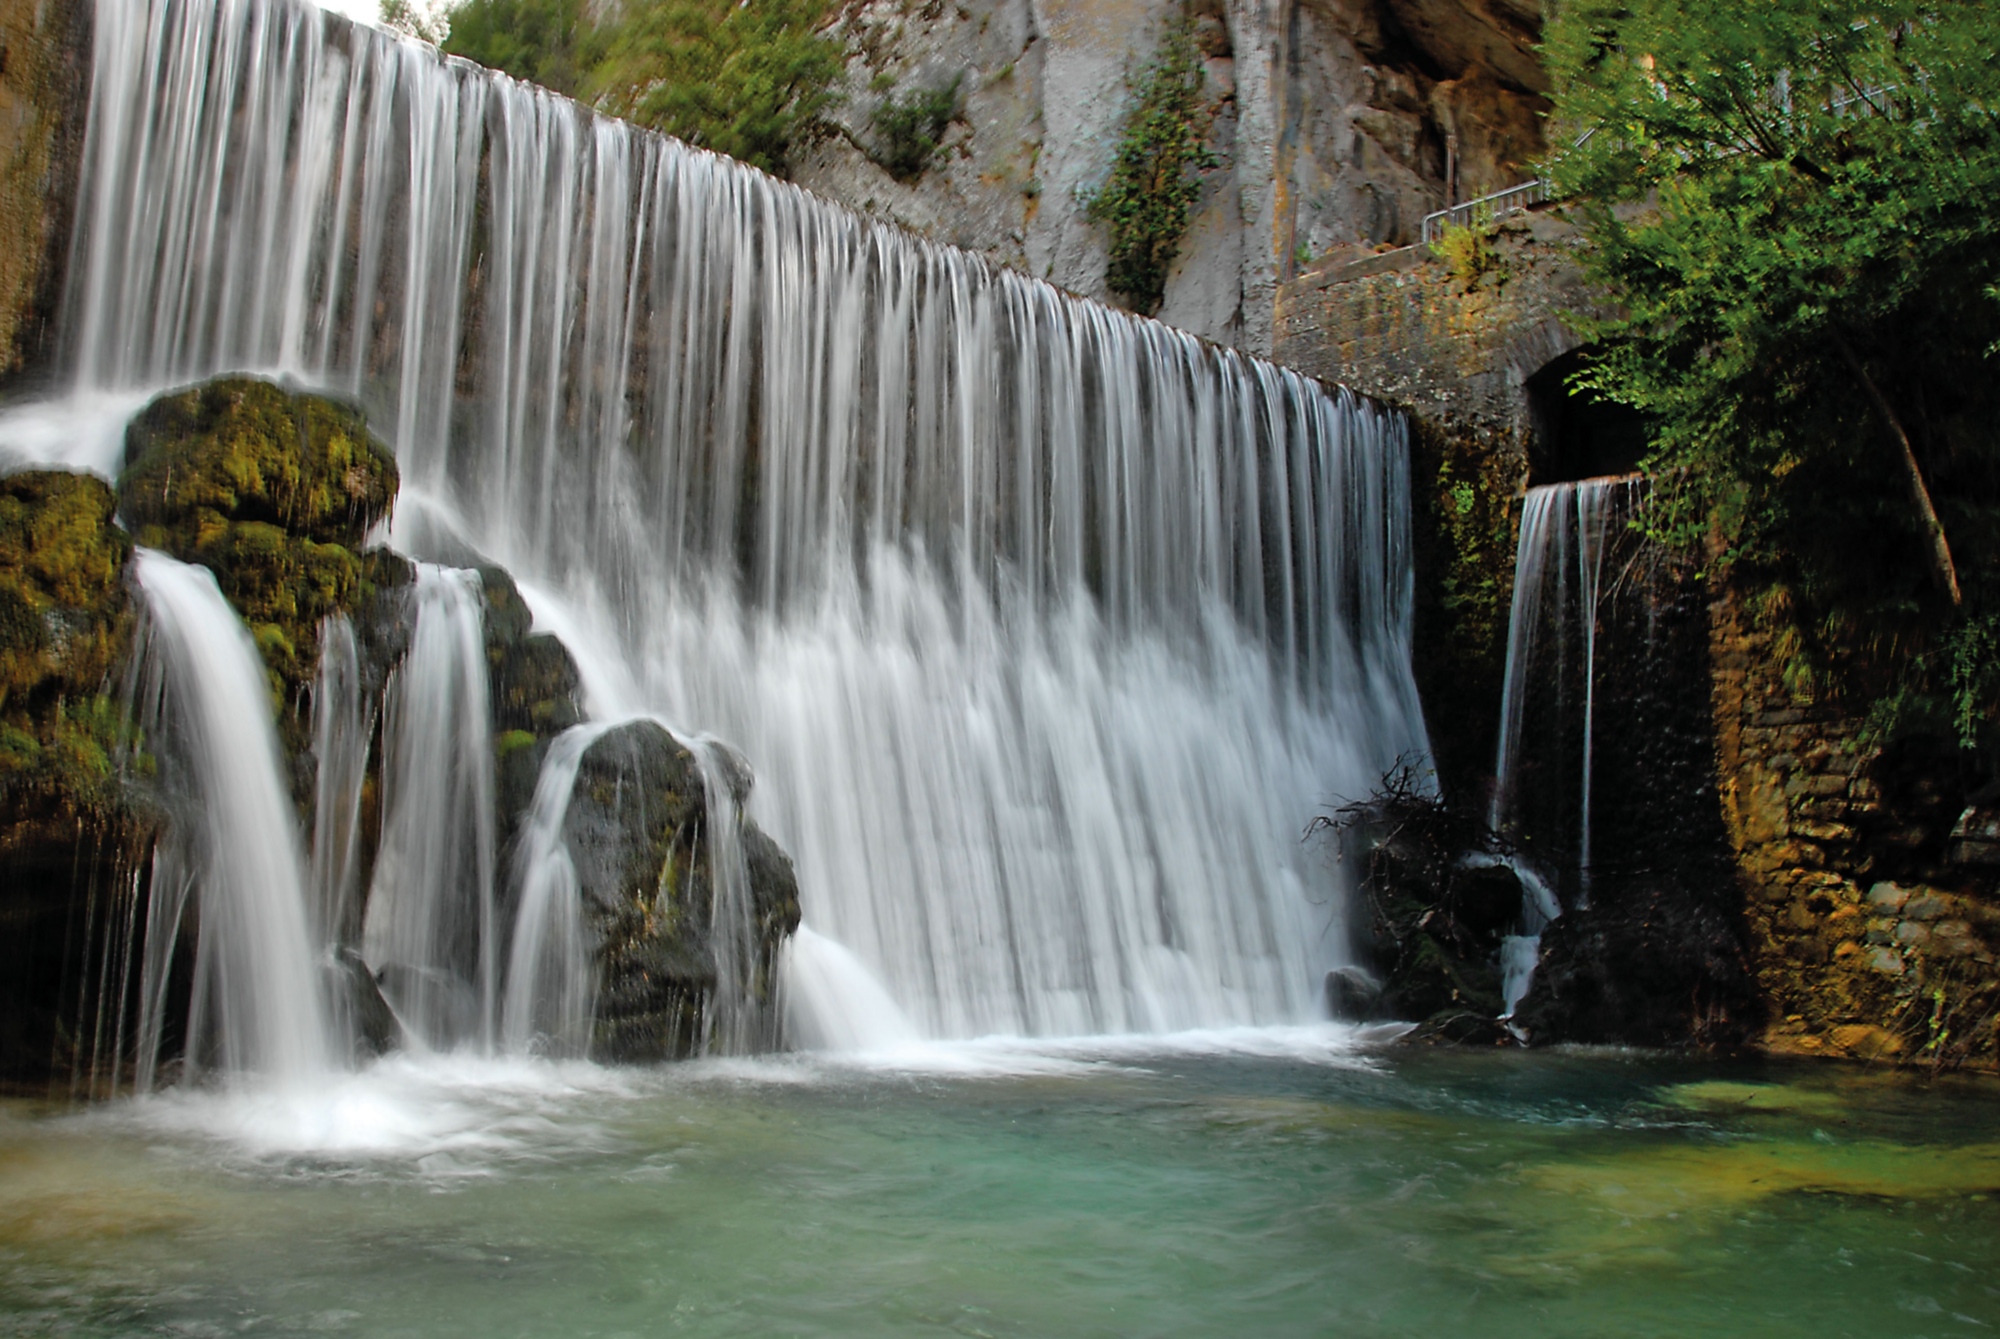 Waterfall near the Geo-Archeo-Adventure Park of the Caves